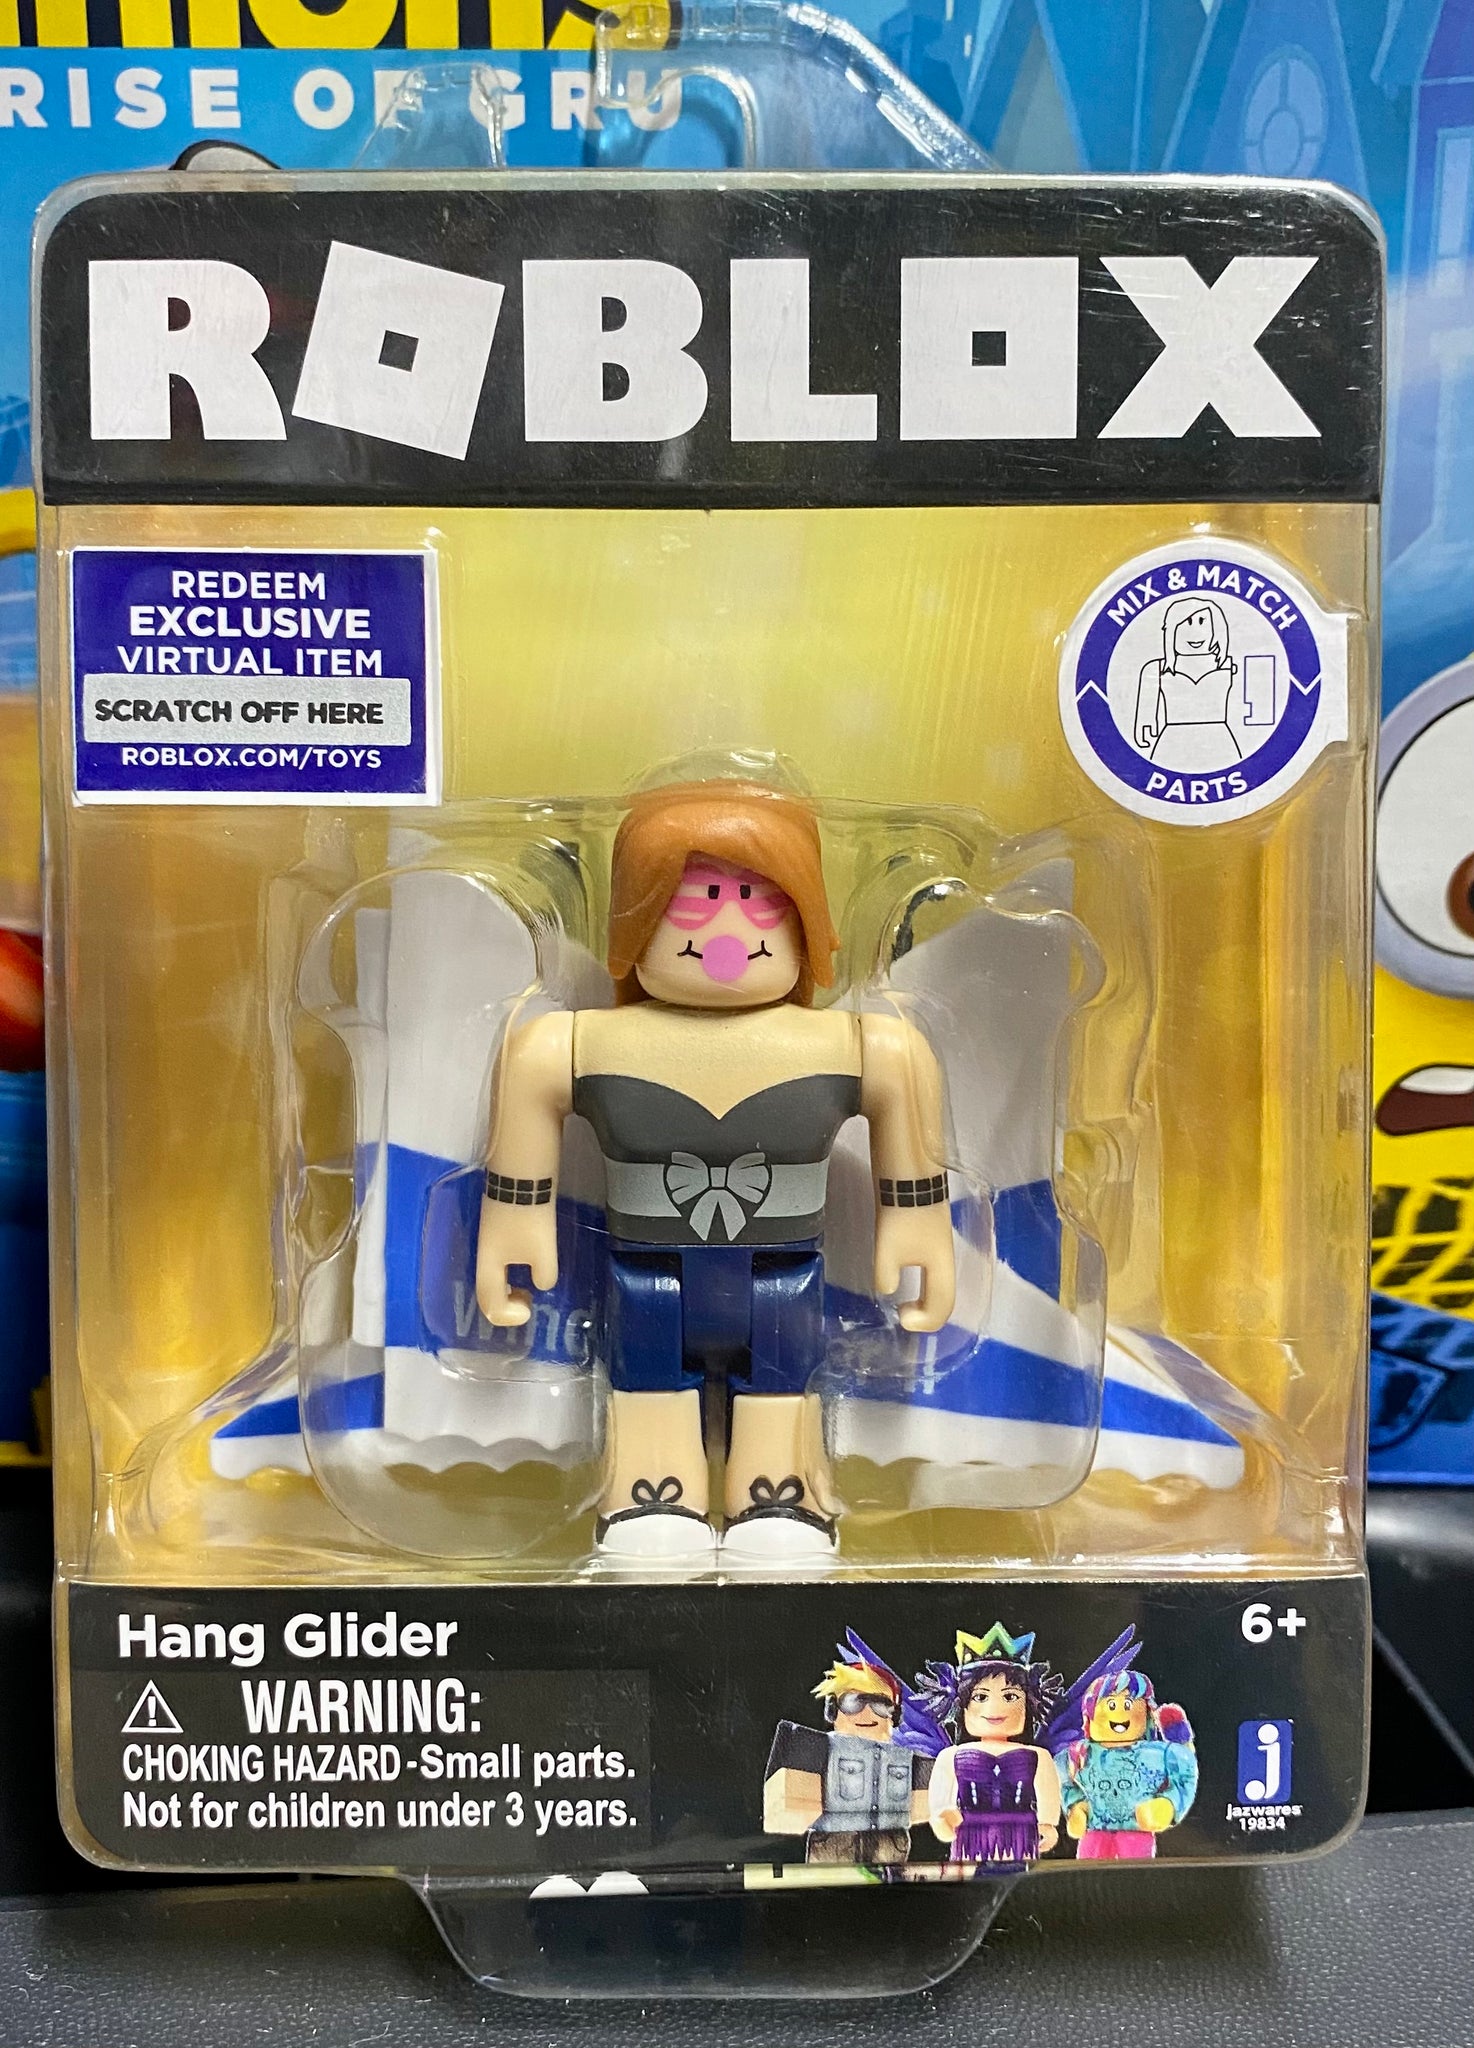 Roblox Celebrity Collection - Fashion Icons Four Figure Pack